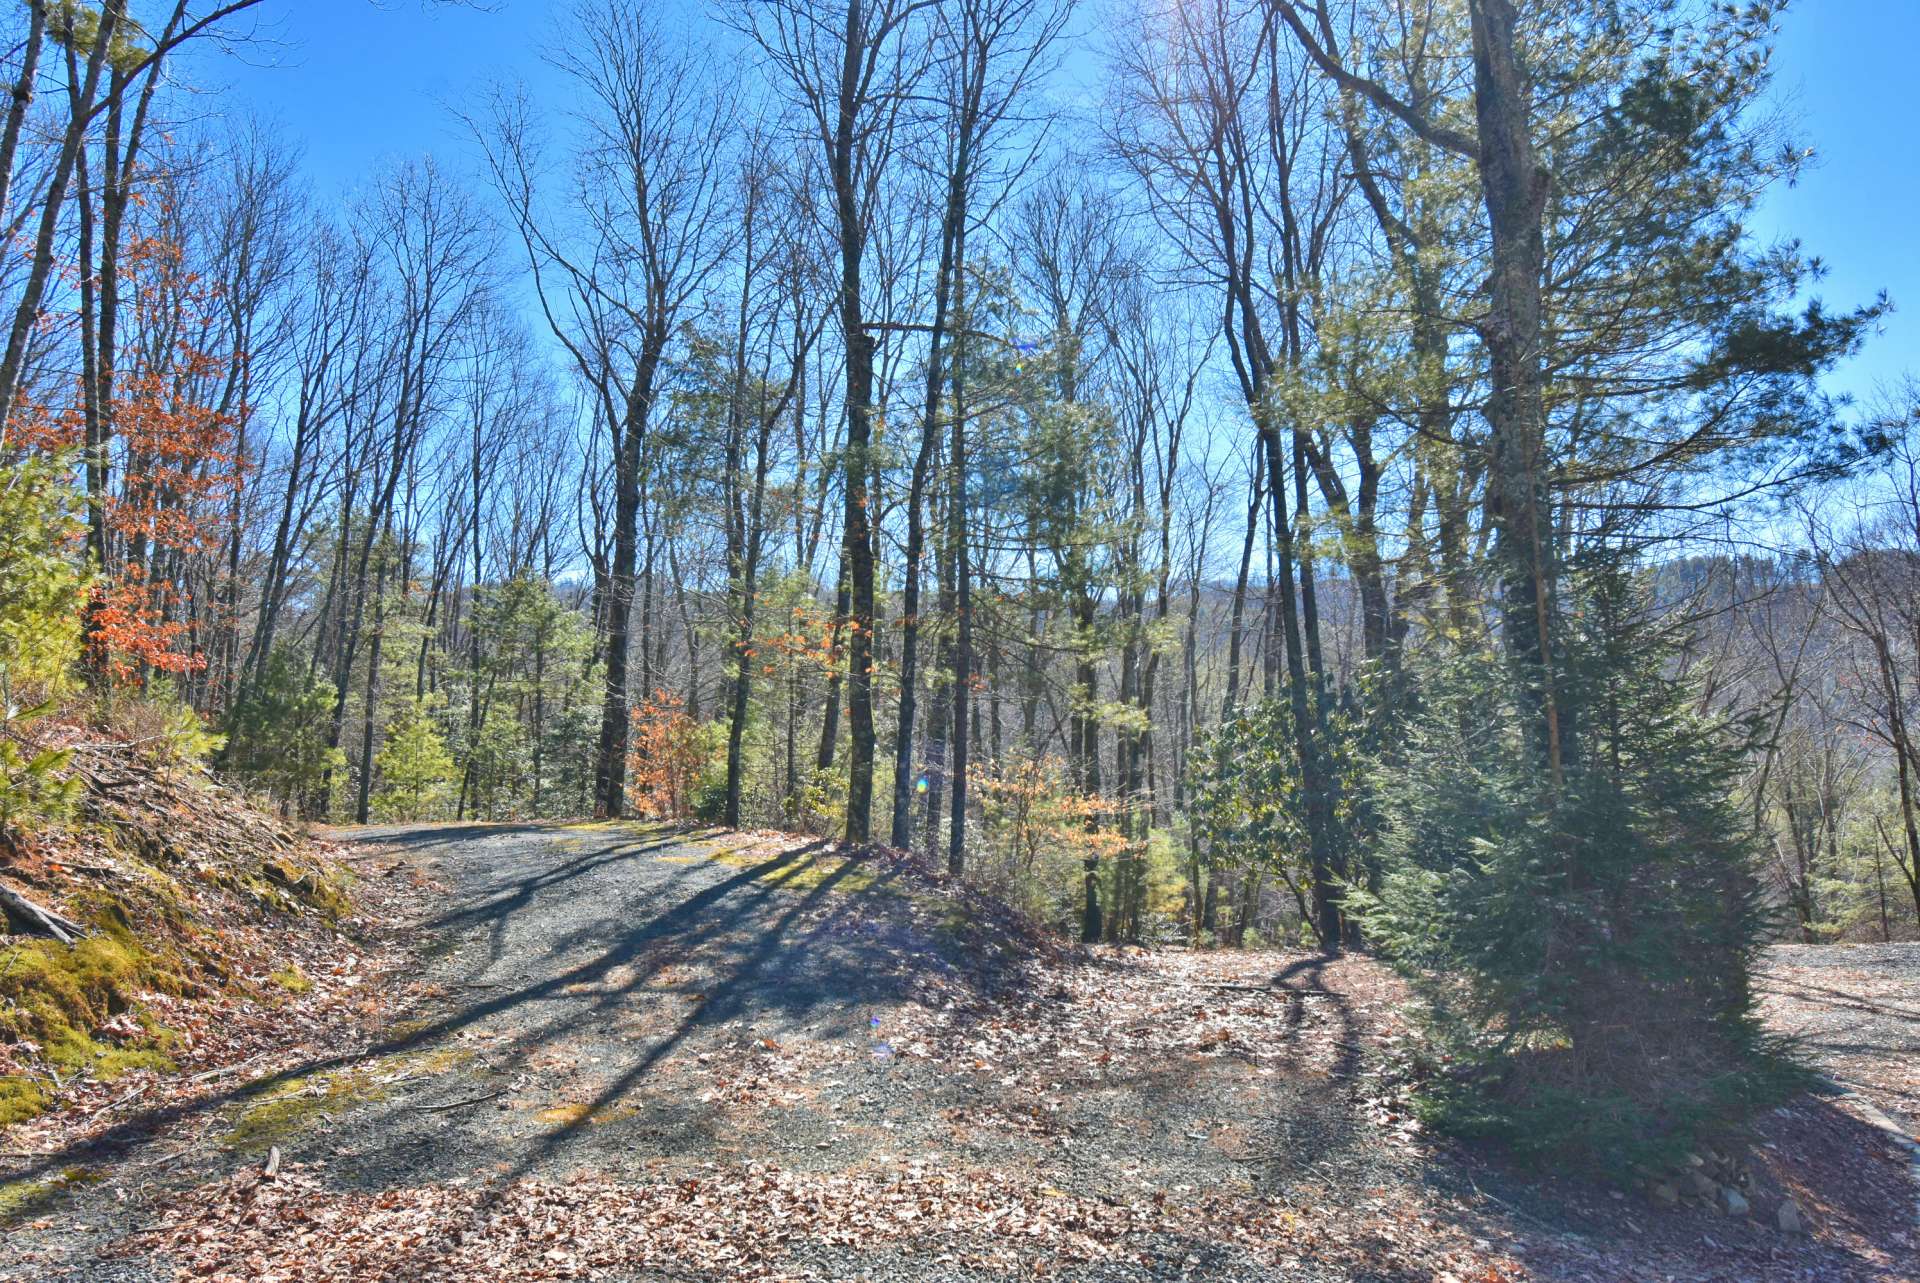 This 3.49 acre tract is a combination of 3 lots, 32, 33, and 34, offering seclusion and mountain views.